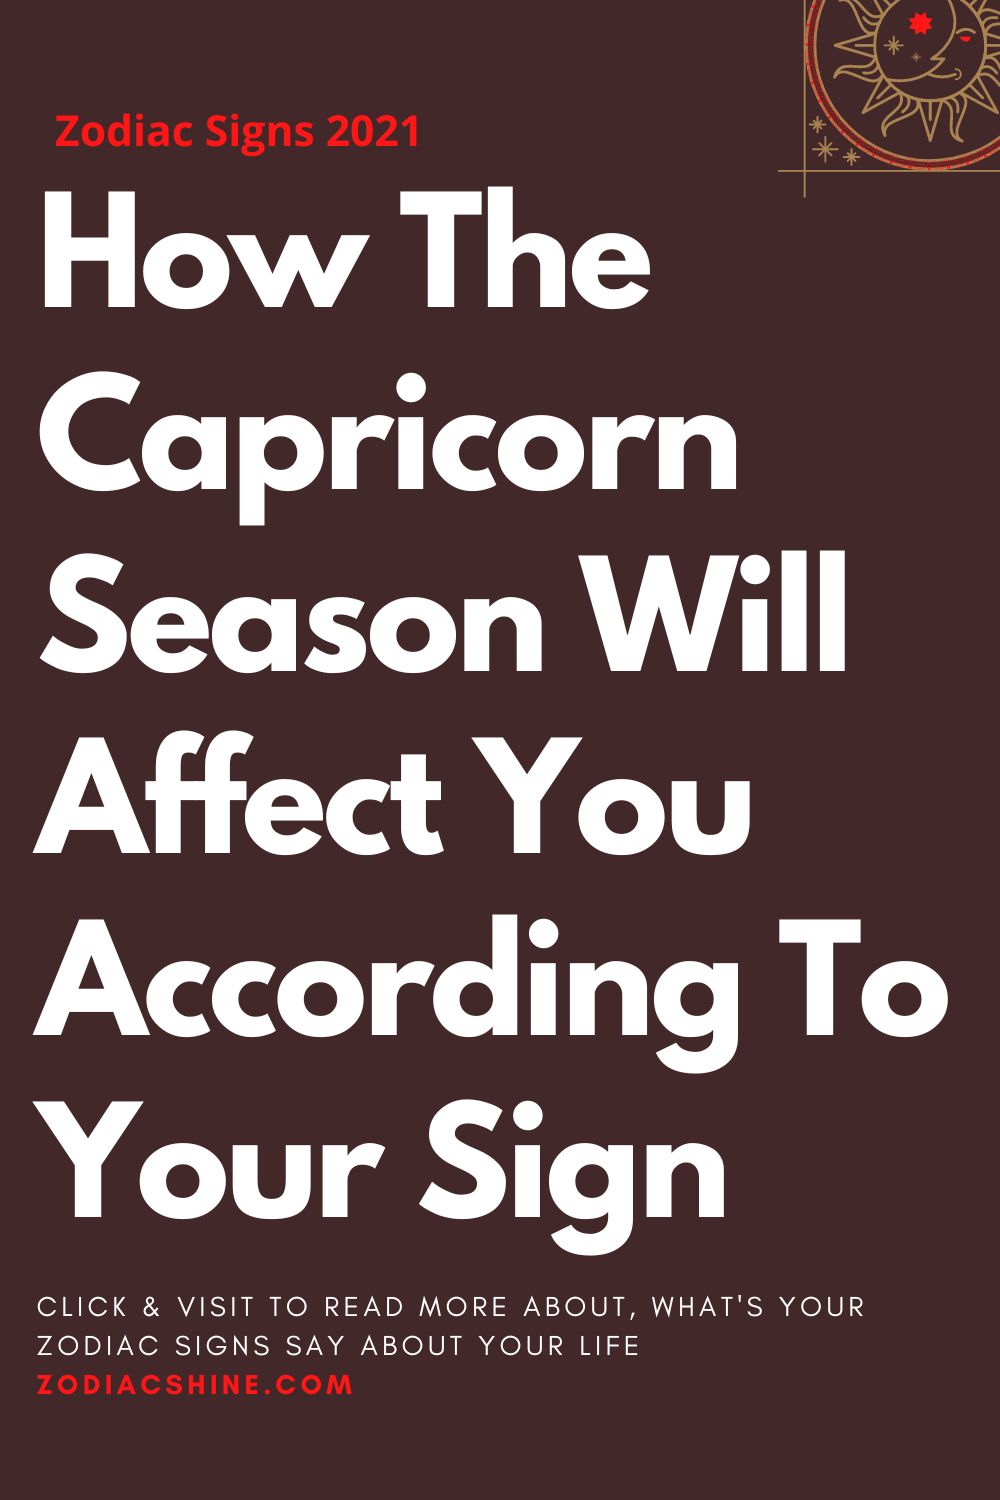 How The Capricorn Season Will Affect You According To Your Sign